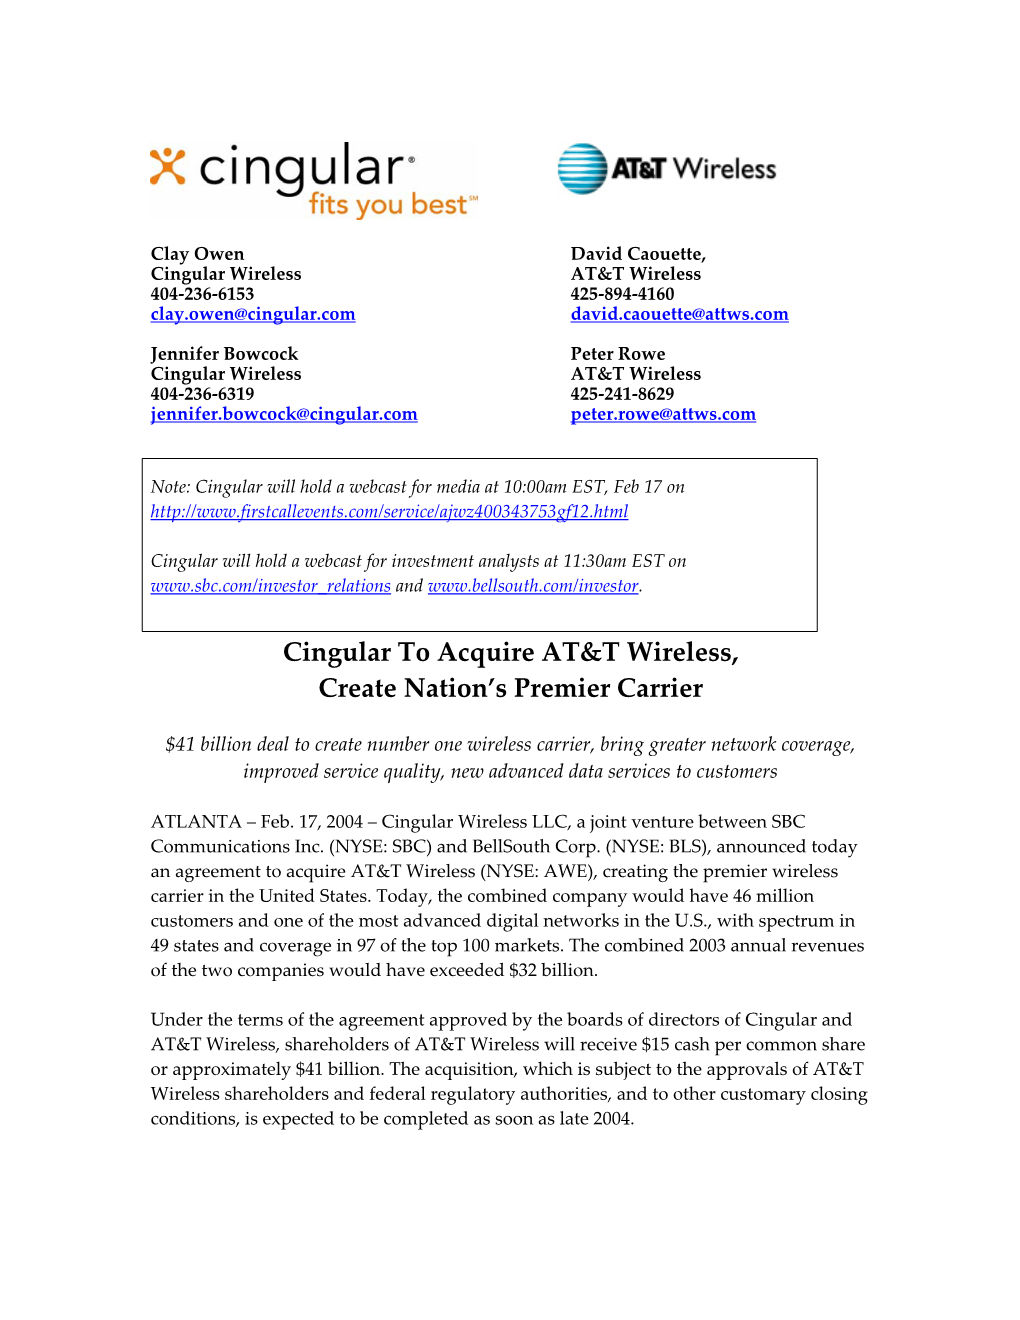 Cingular to Acquire AT&T Wireless, Create Nation's Premier Carrier